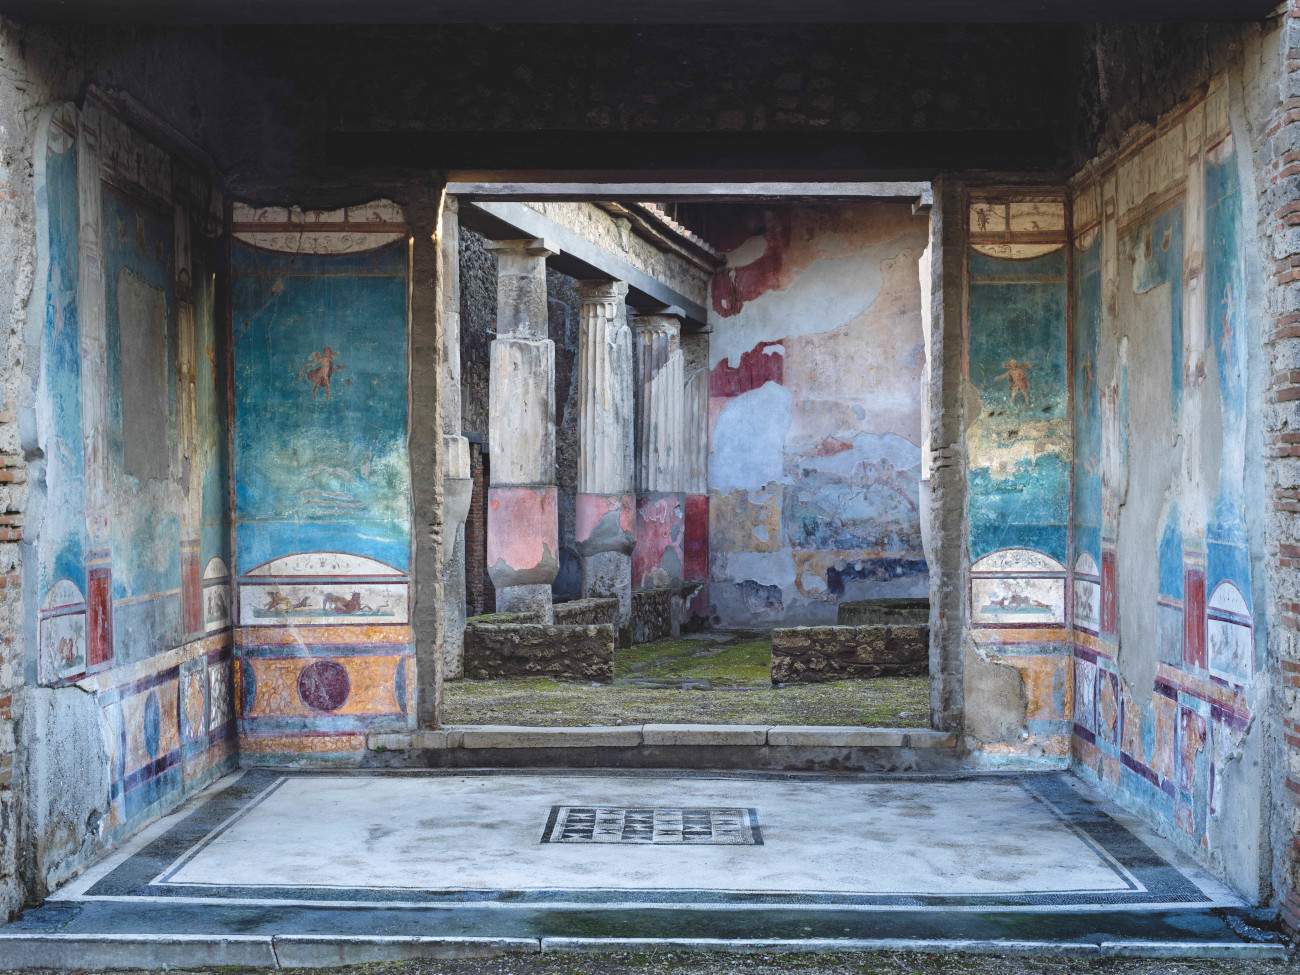 Rome, the interiors of Pompeii's domus in Luigi Spina's shots on display at Castel Sant'Angelo 